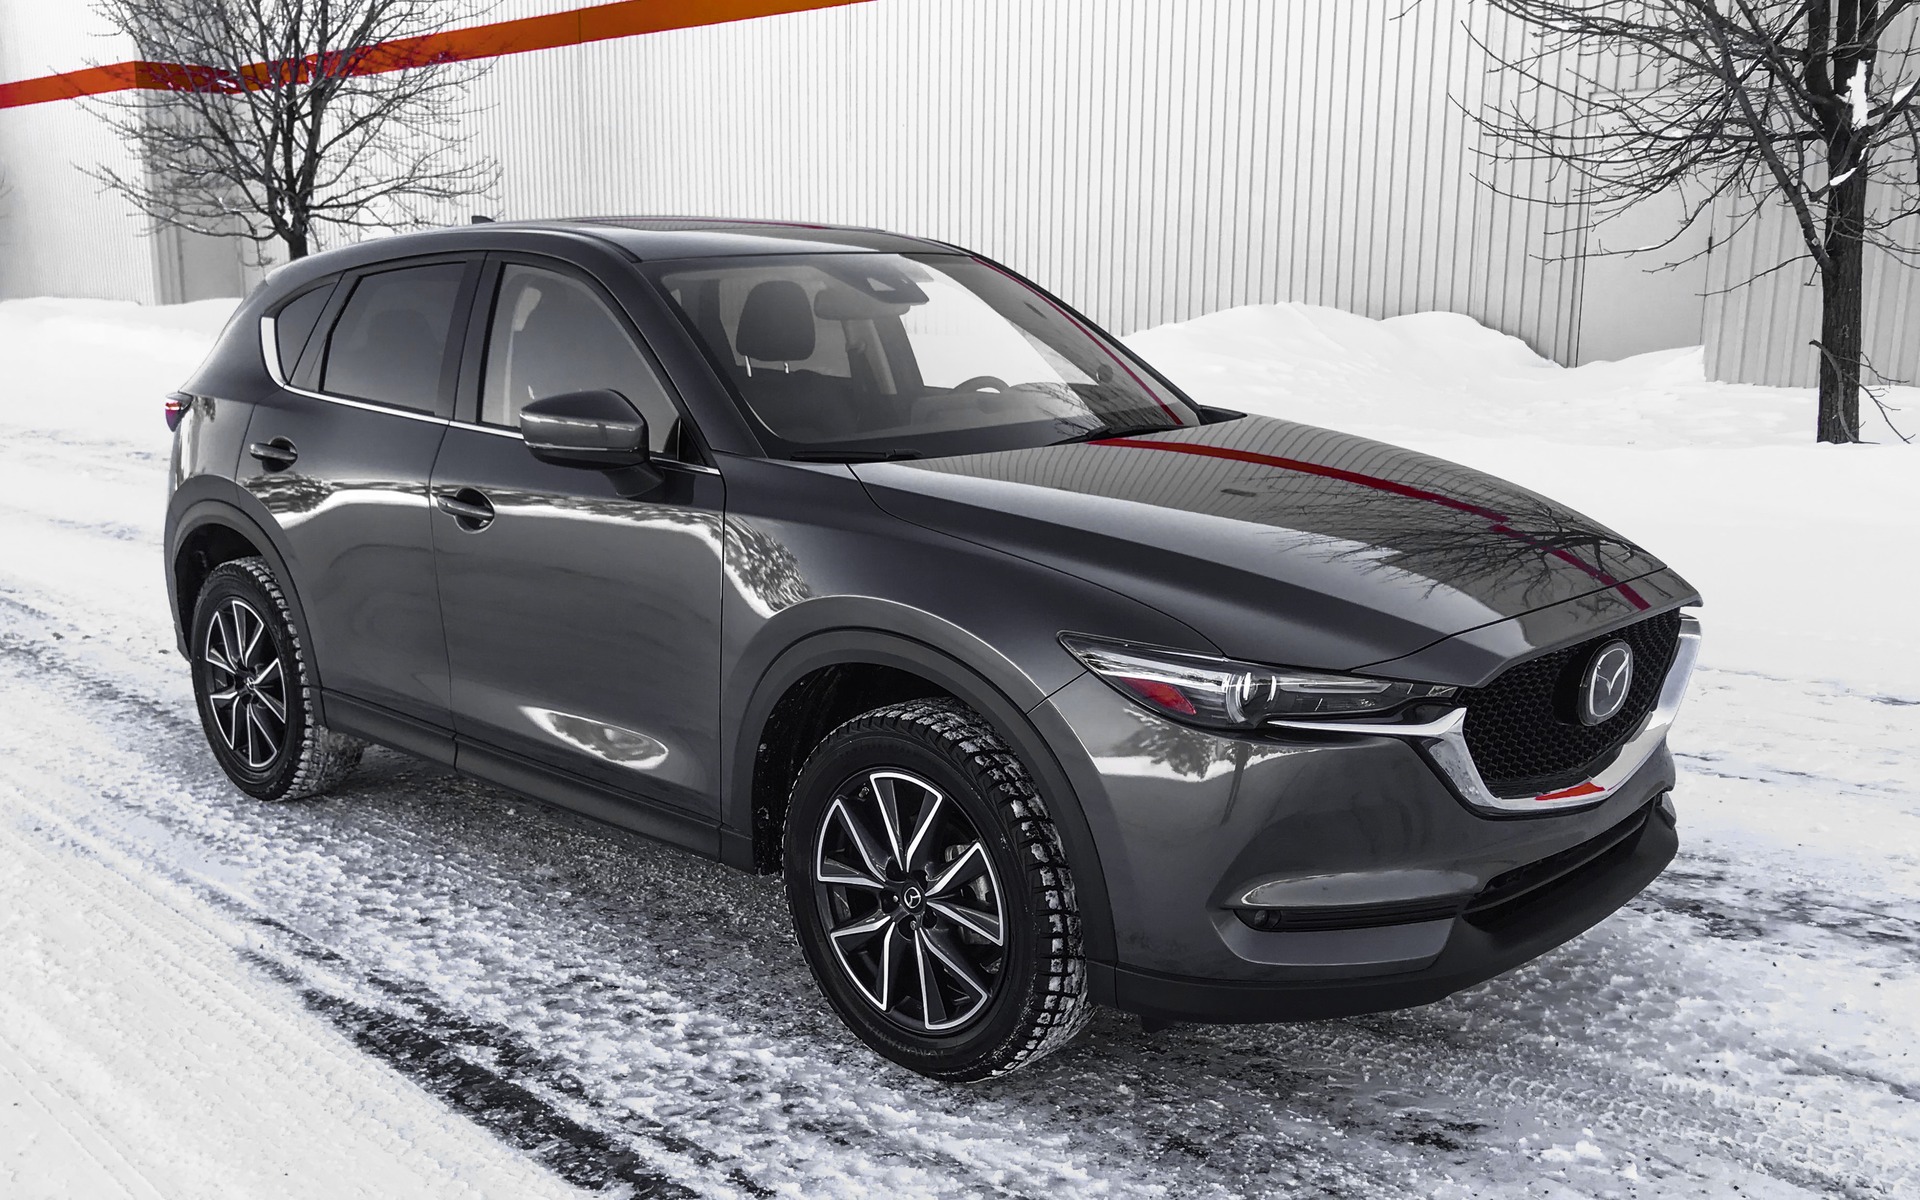 2017 Mazda CX-5: Ready to Take on the Big Boys - The Car Guide